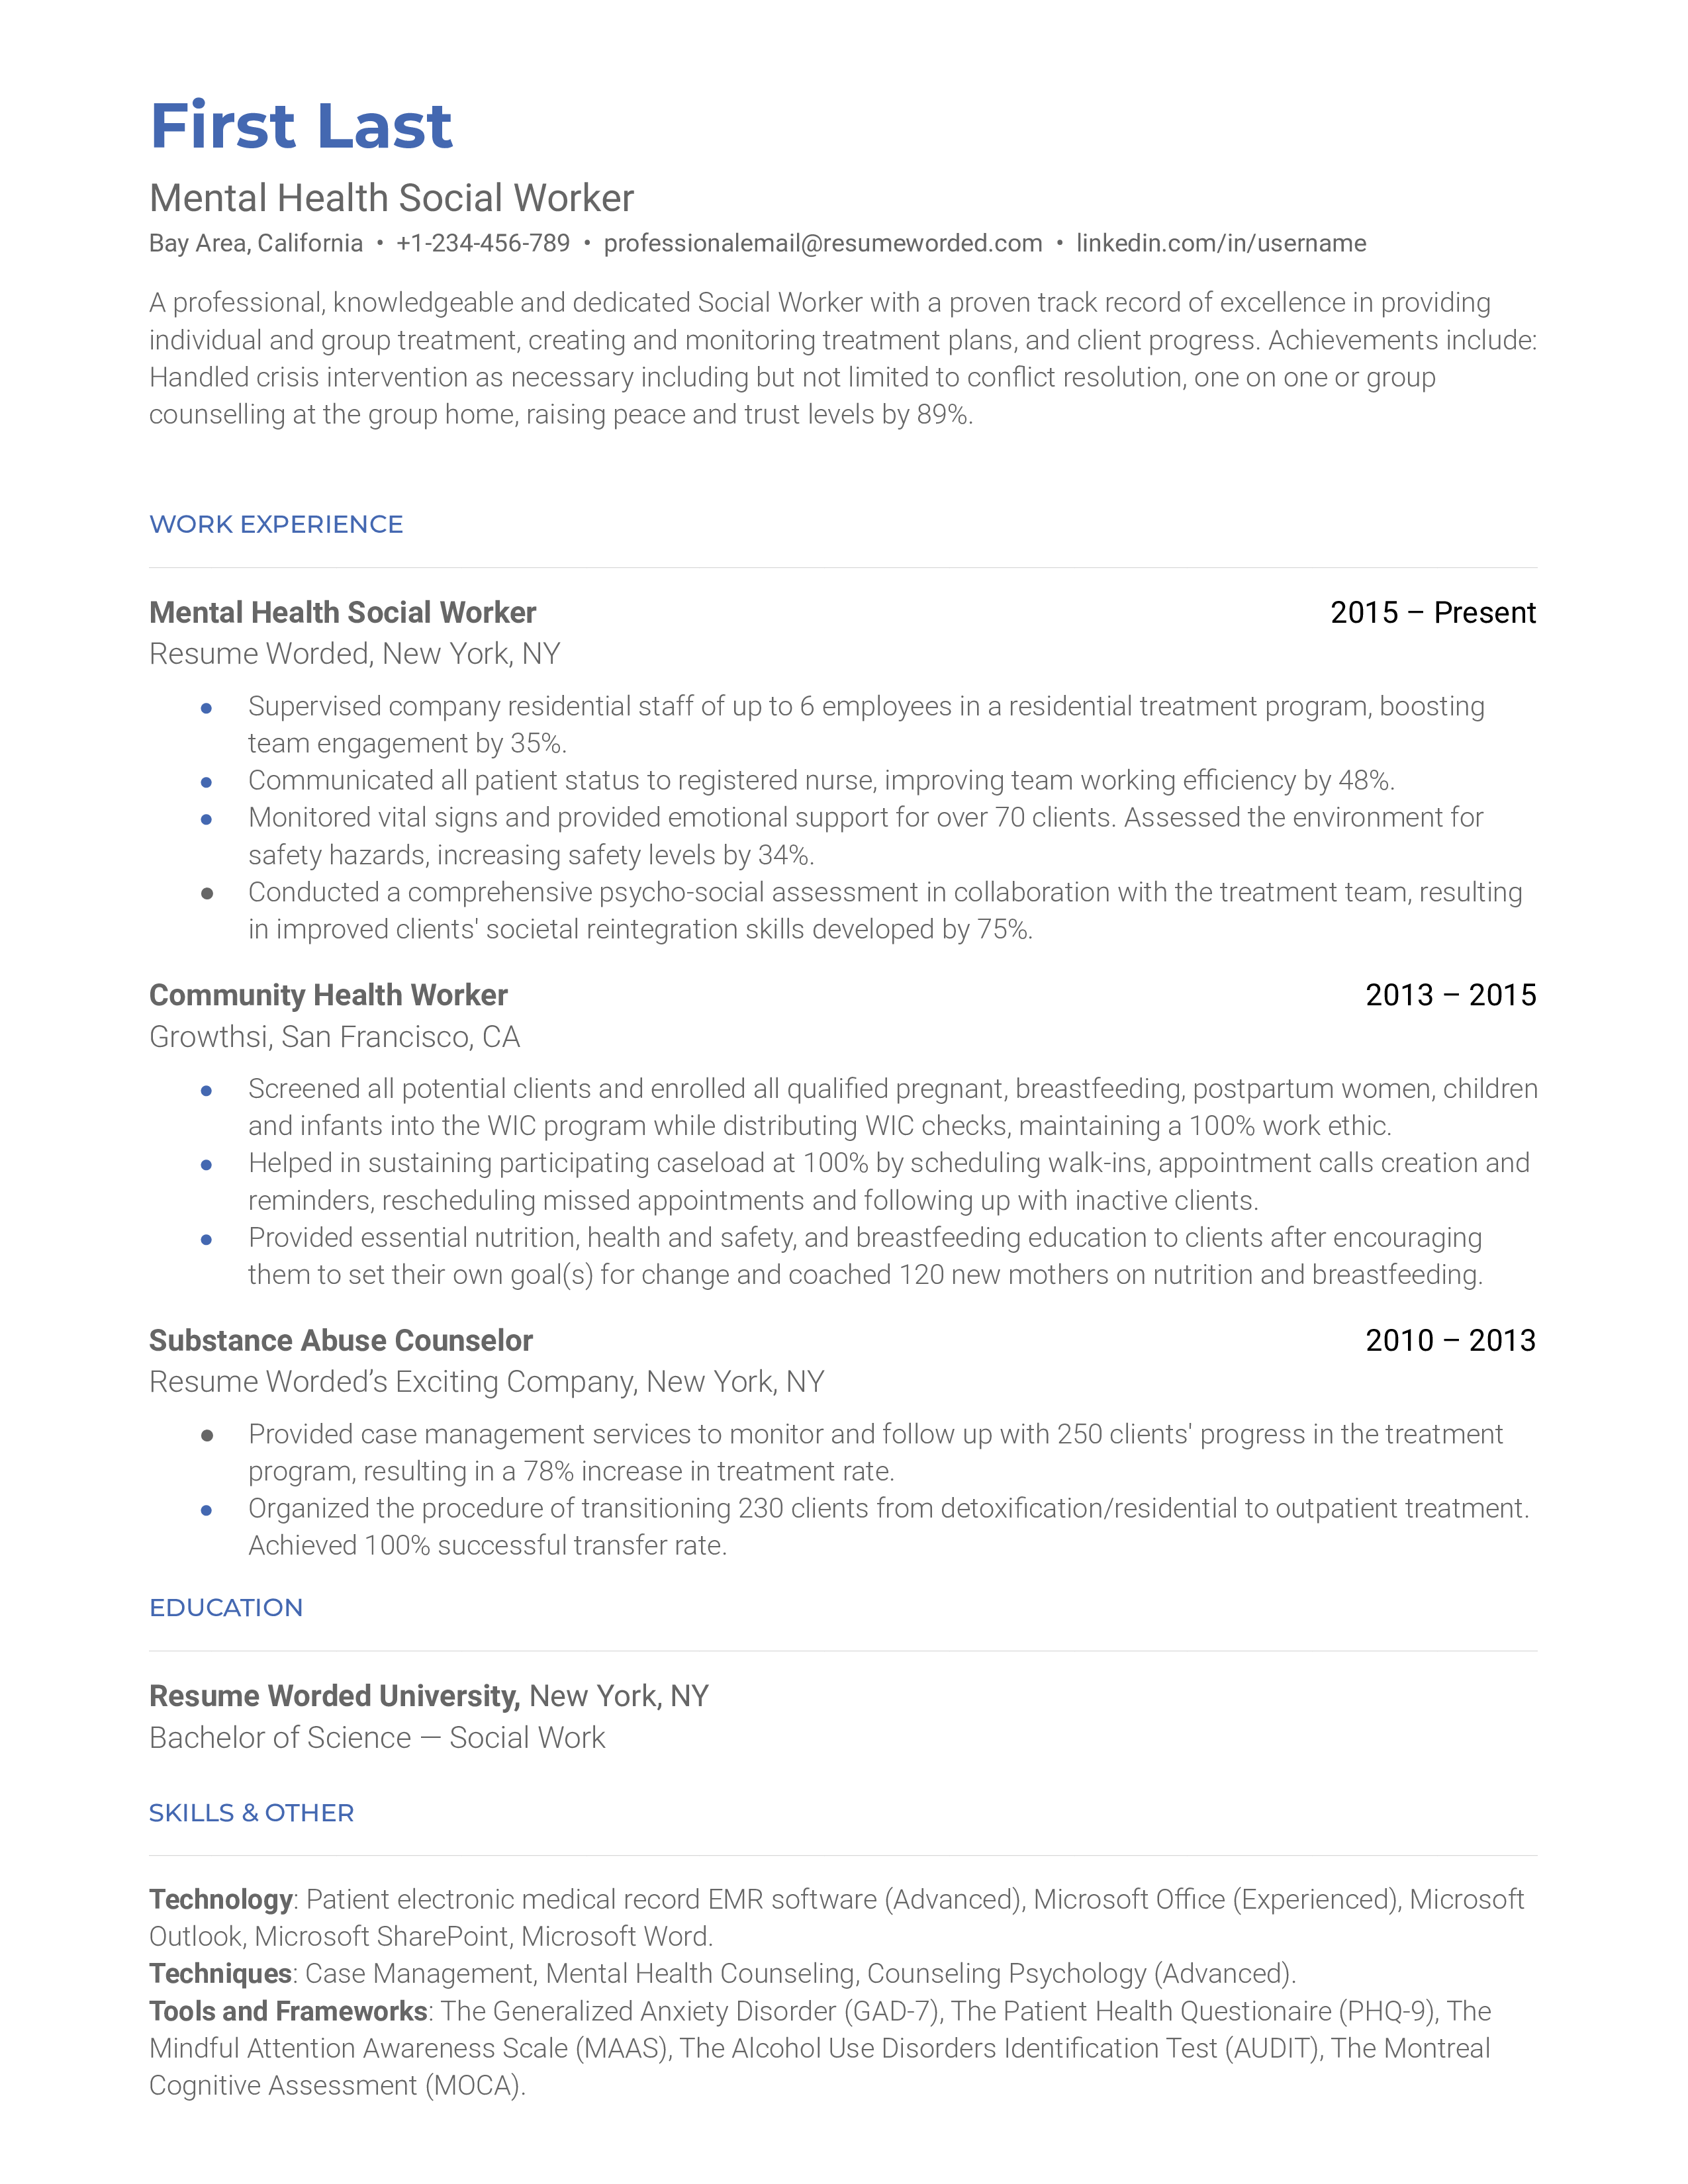 A mental health social worker resume that illustrates strong client success rates and treatment. 